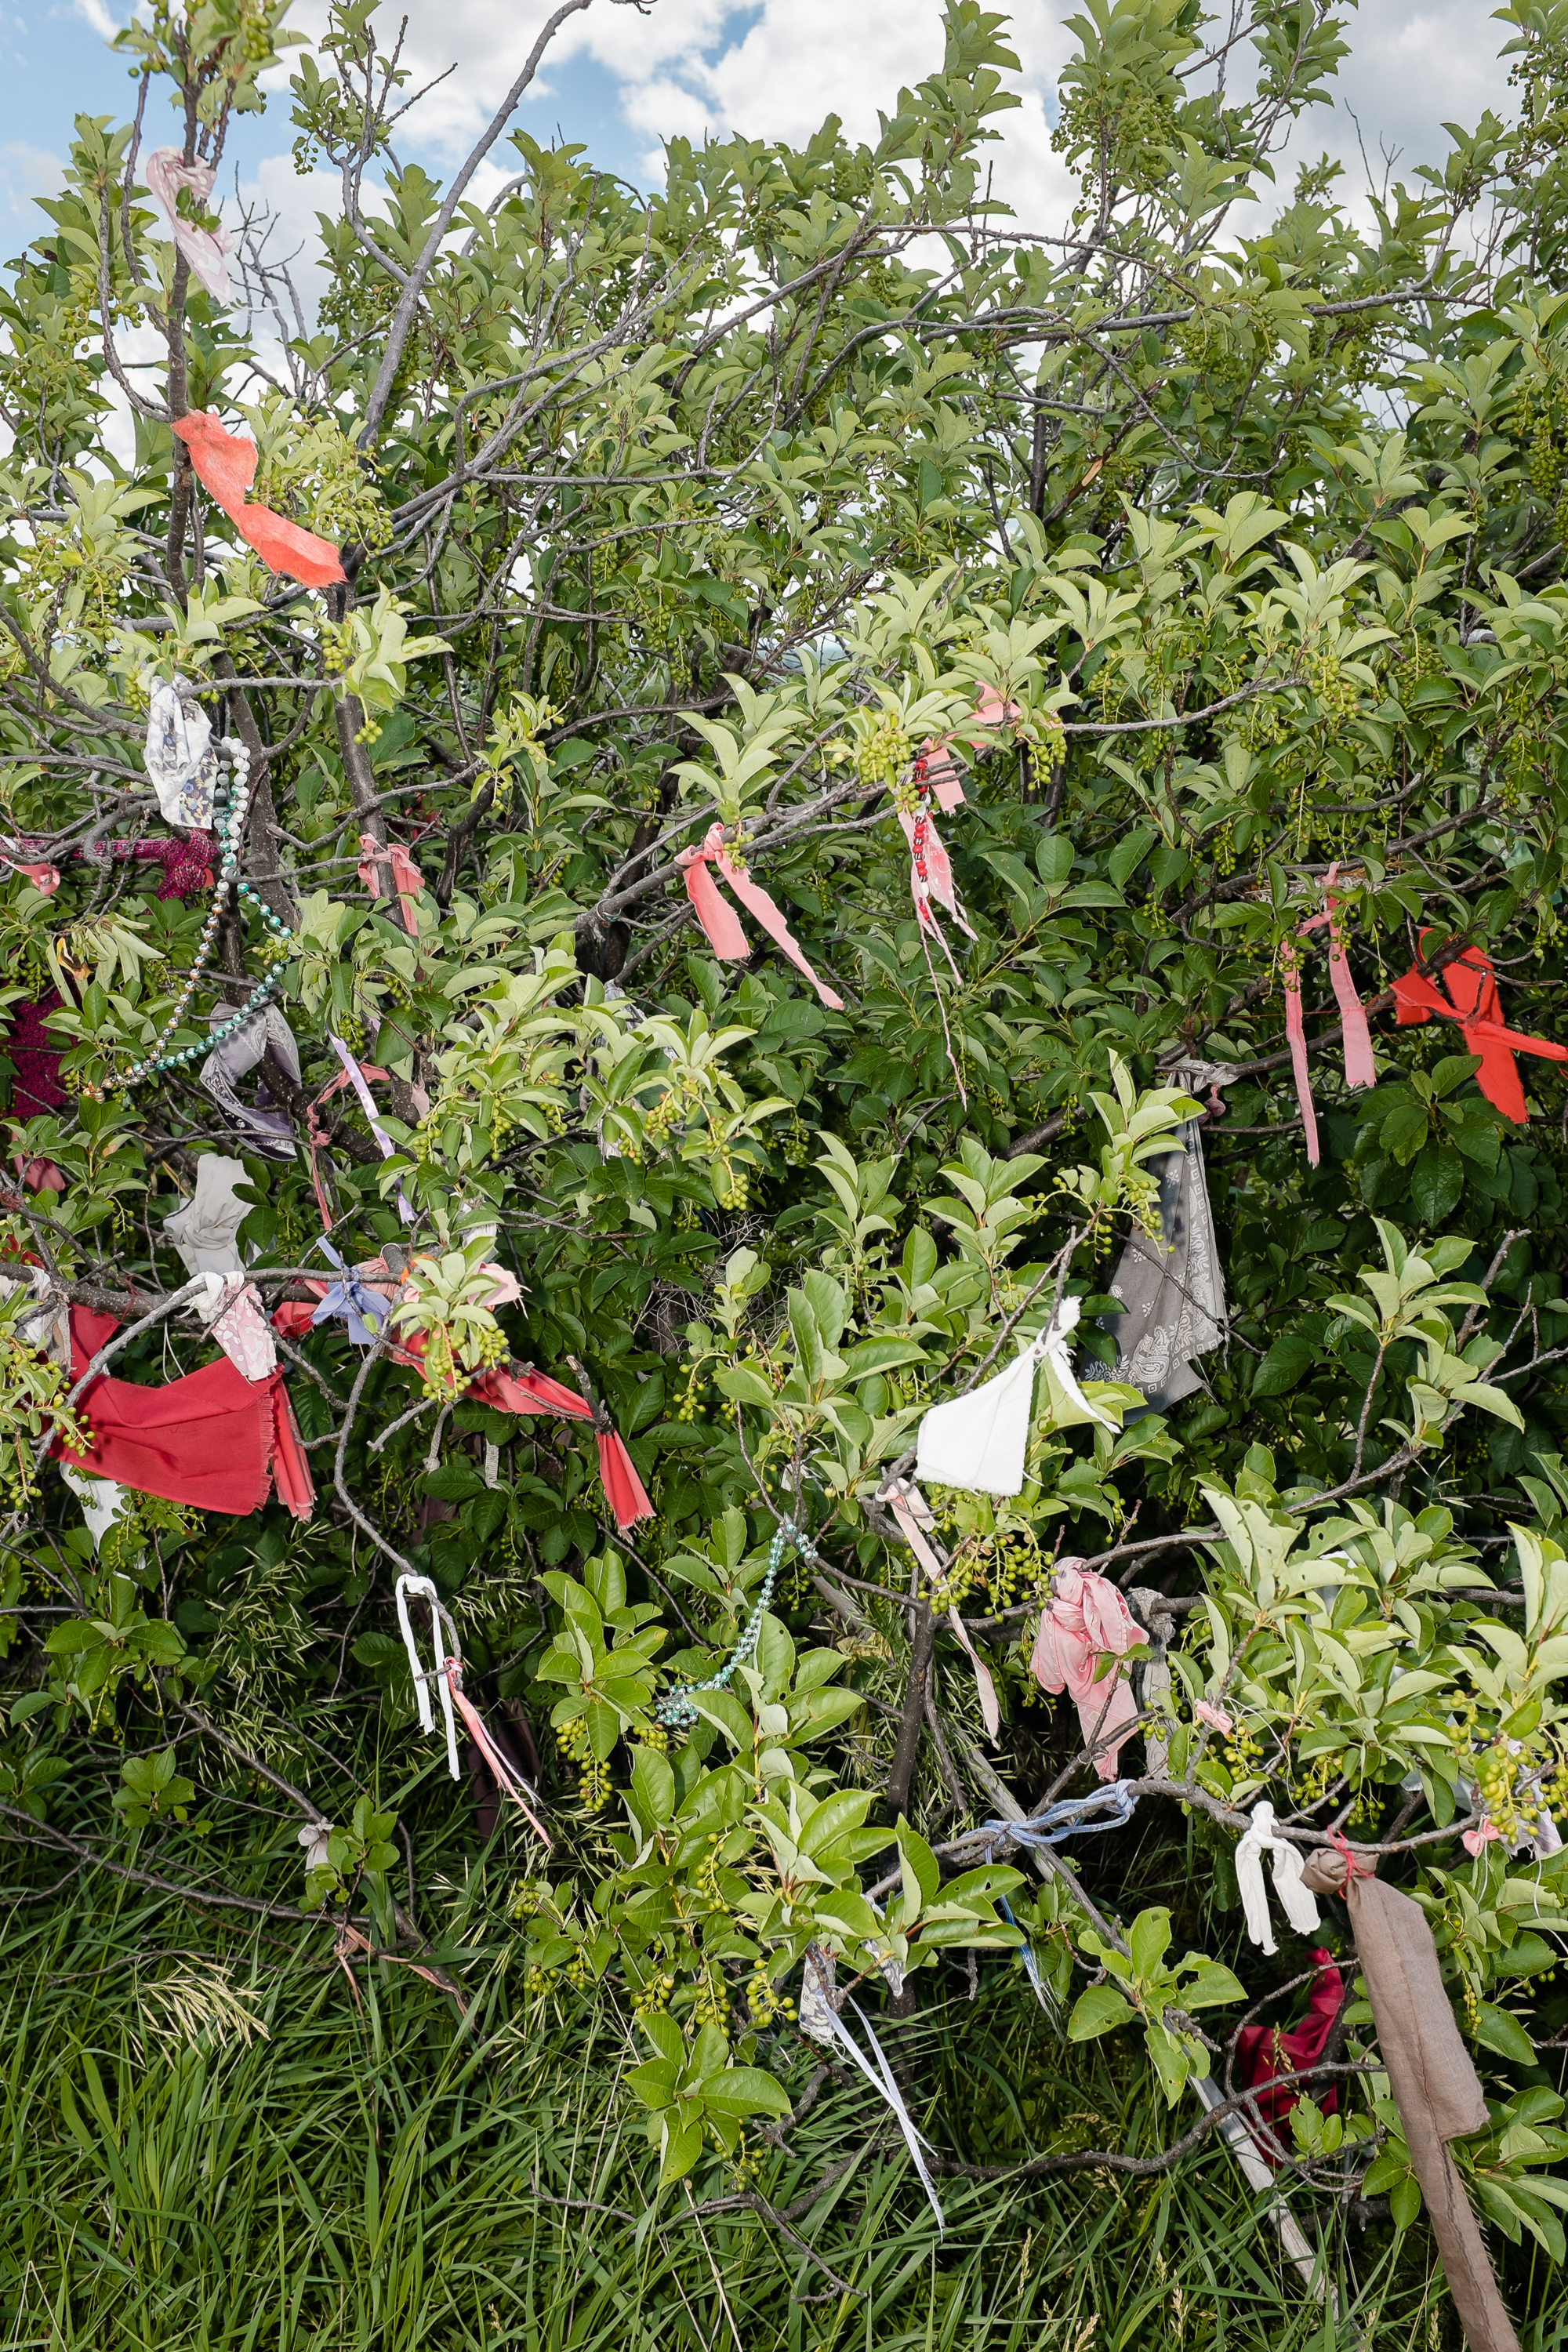  Native American prayer flags in the breeze at Little Big Horn National Battlefield.  